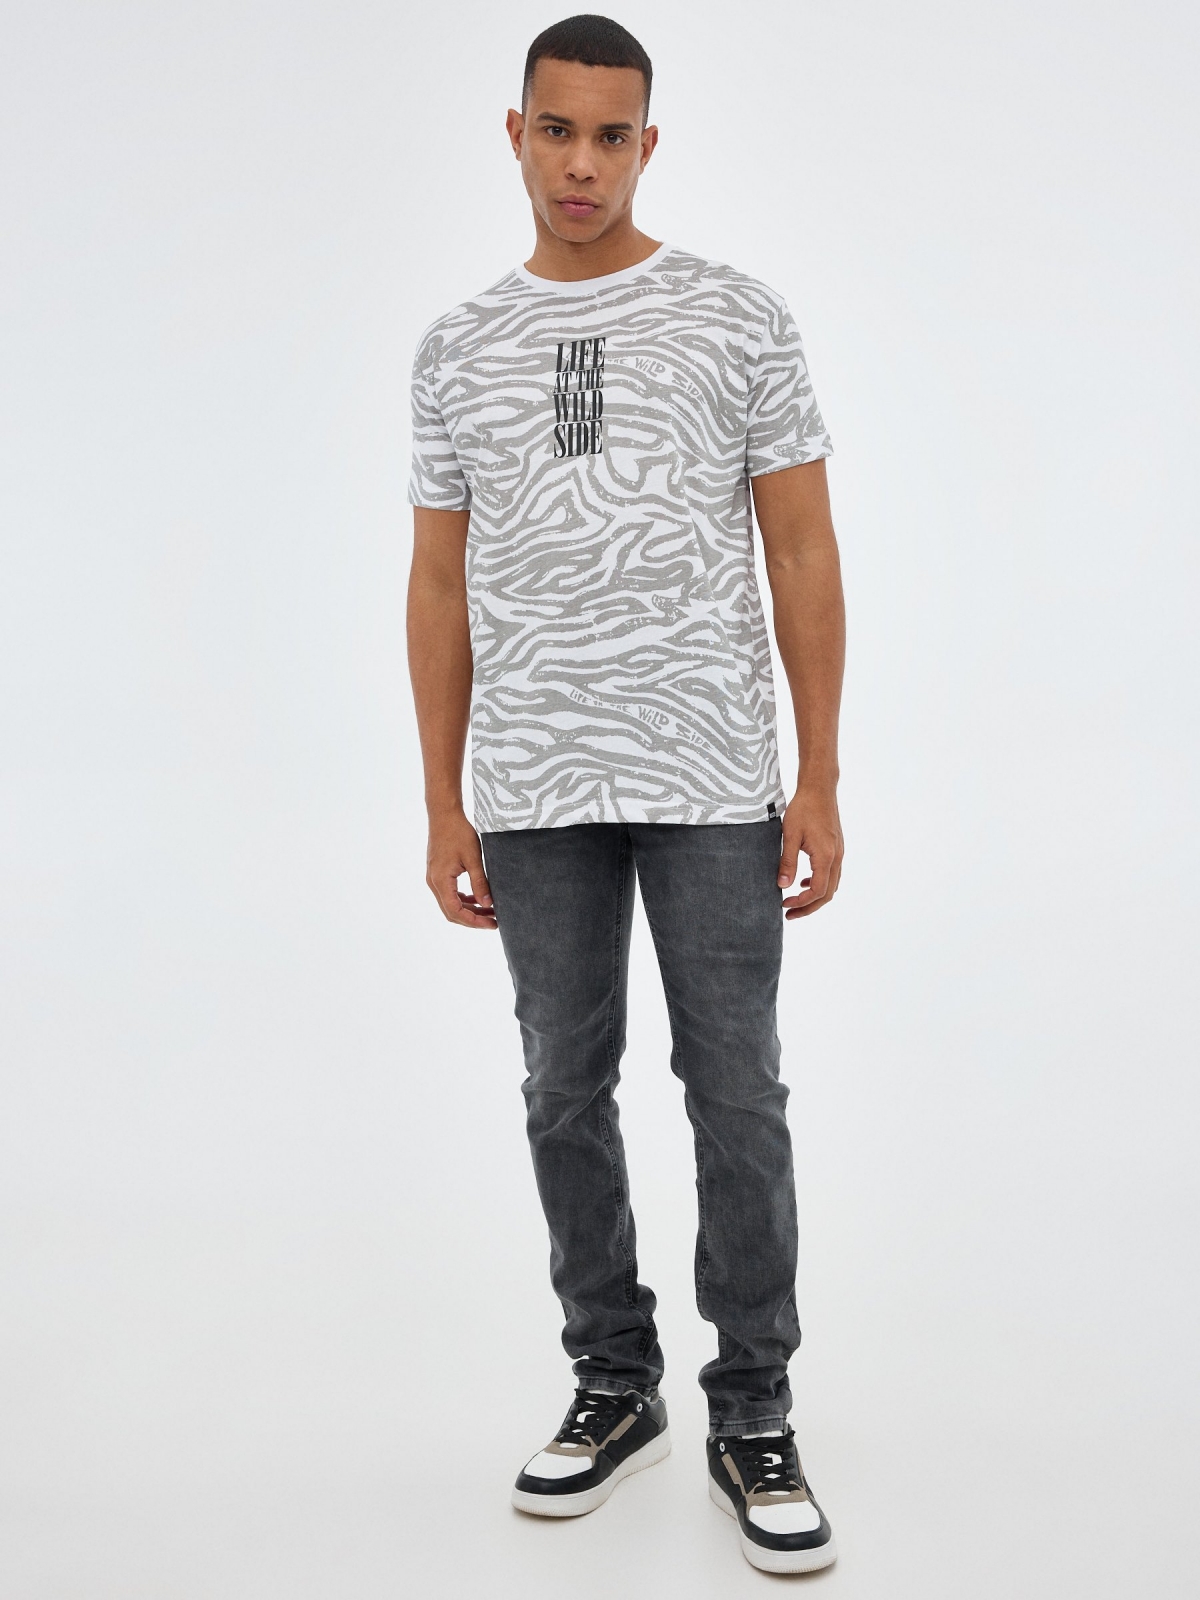 Graphic print t-shirt white front view